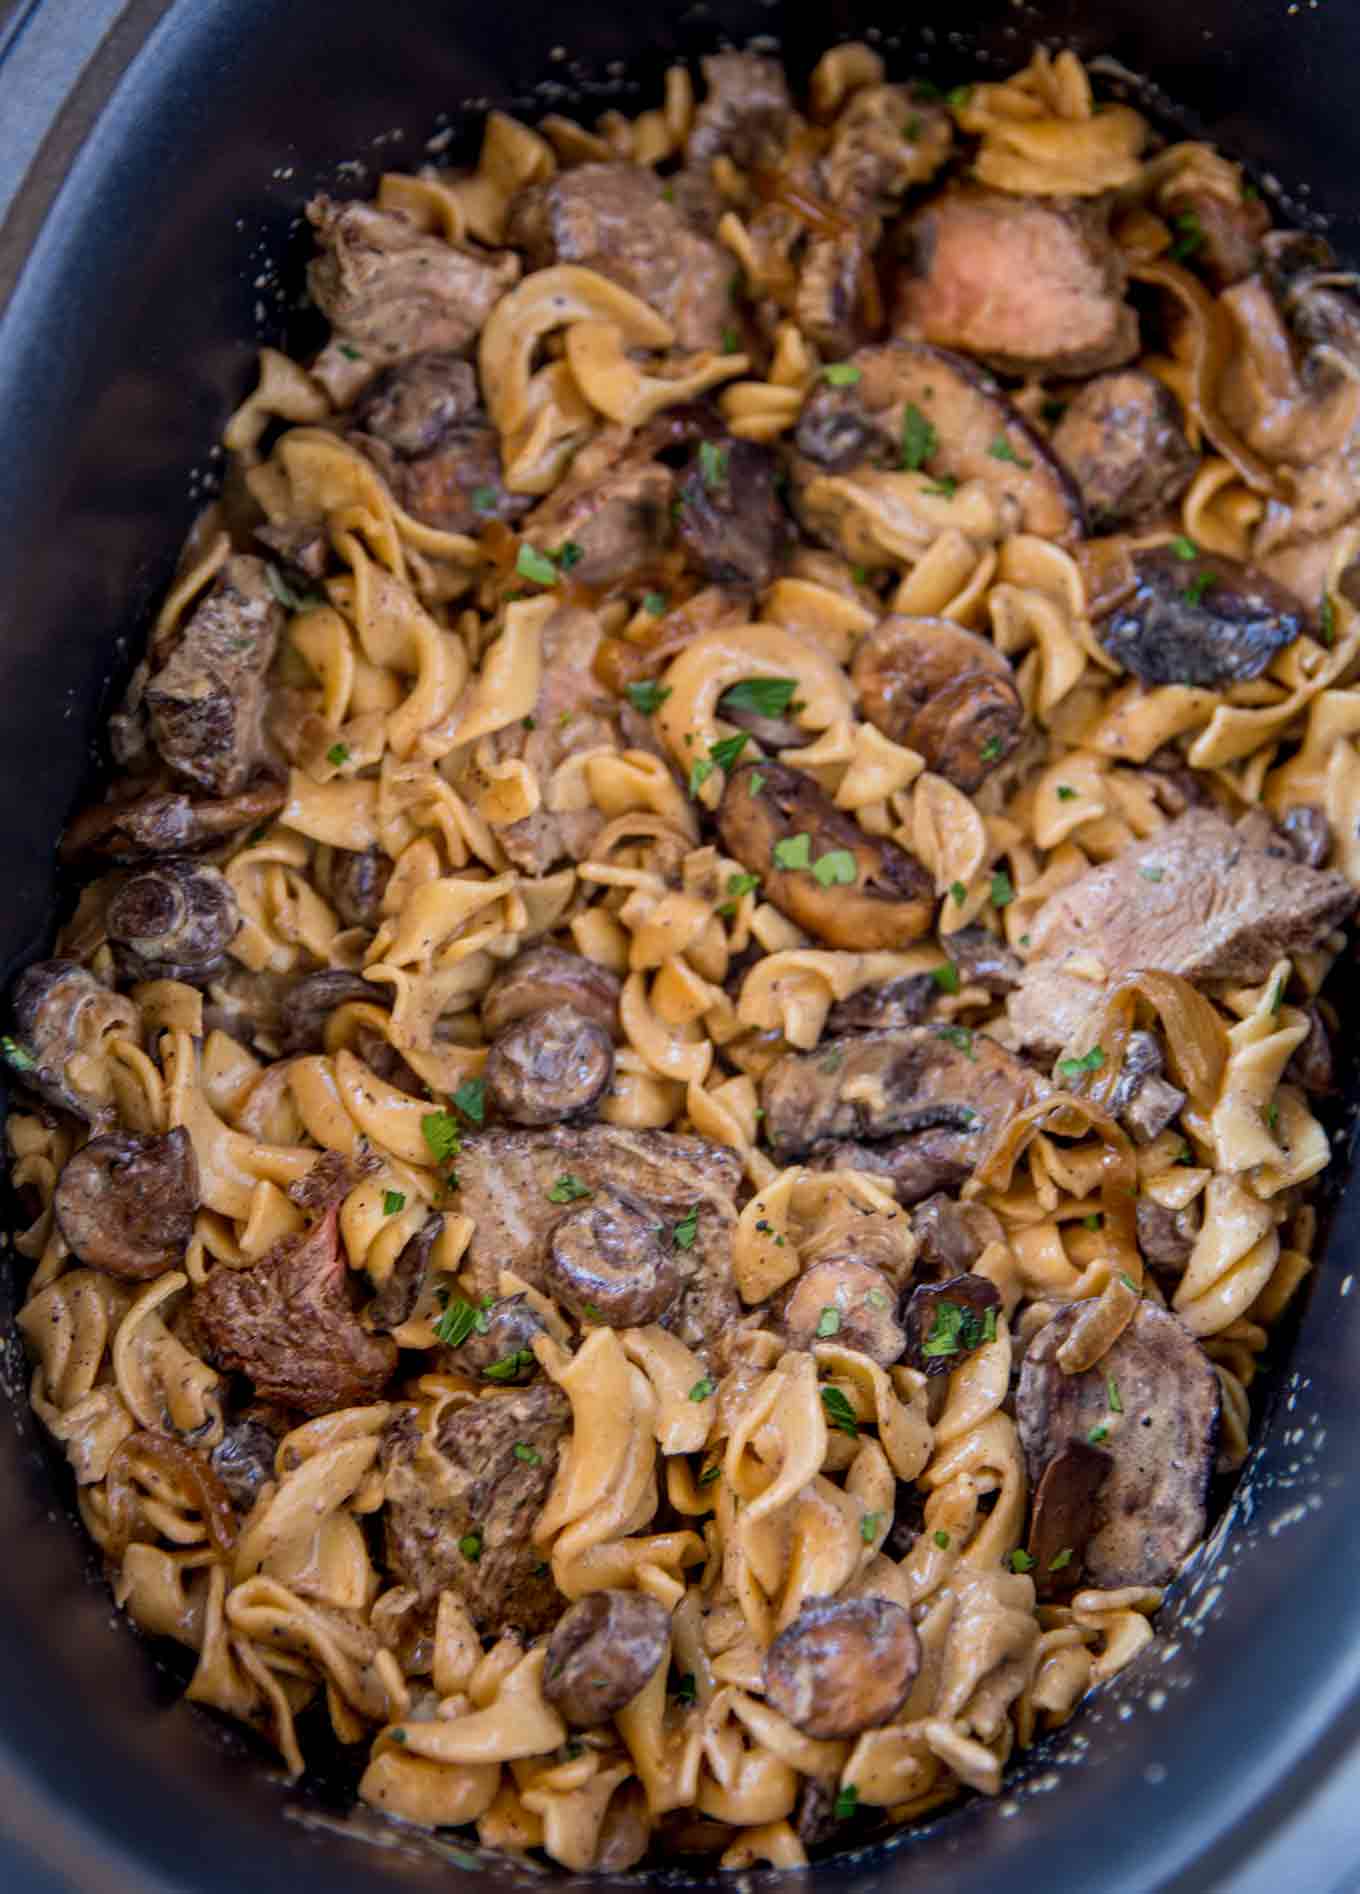 Slow Cooker Beef Stroganoff with tender, sliceable cuts of beef and noodles cooked together in the slow cooker with a rich creamy mushroom sauce.